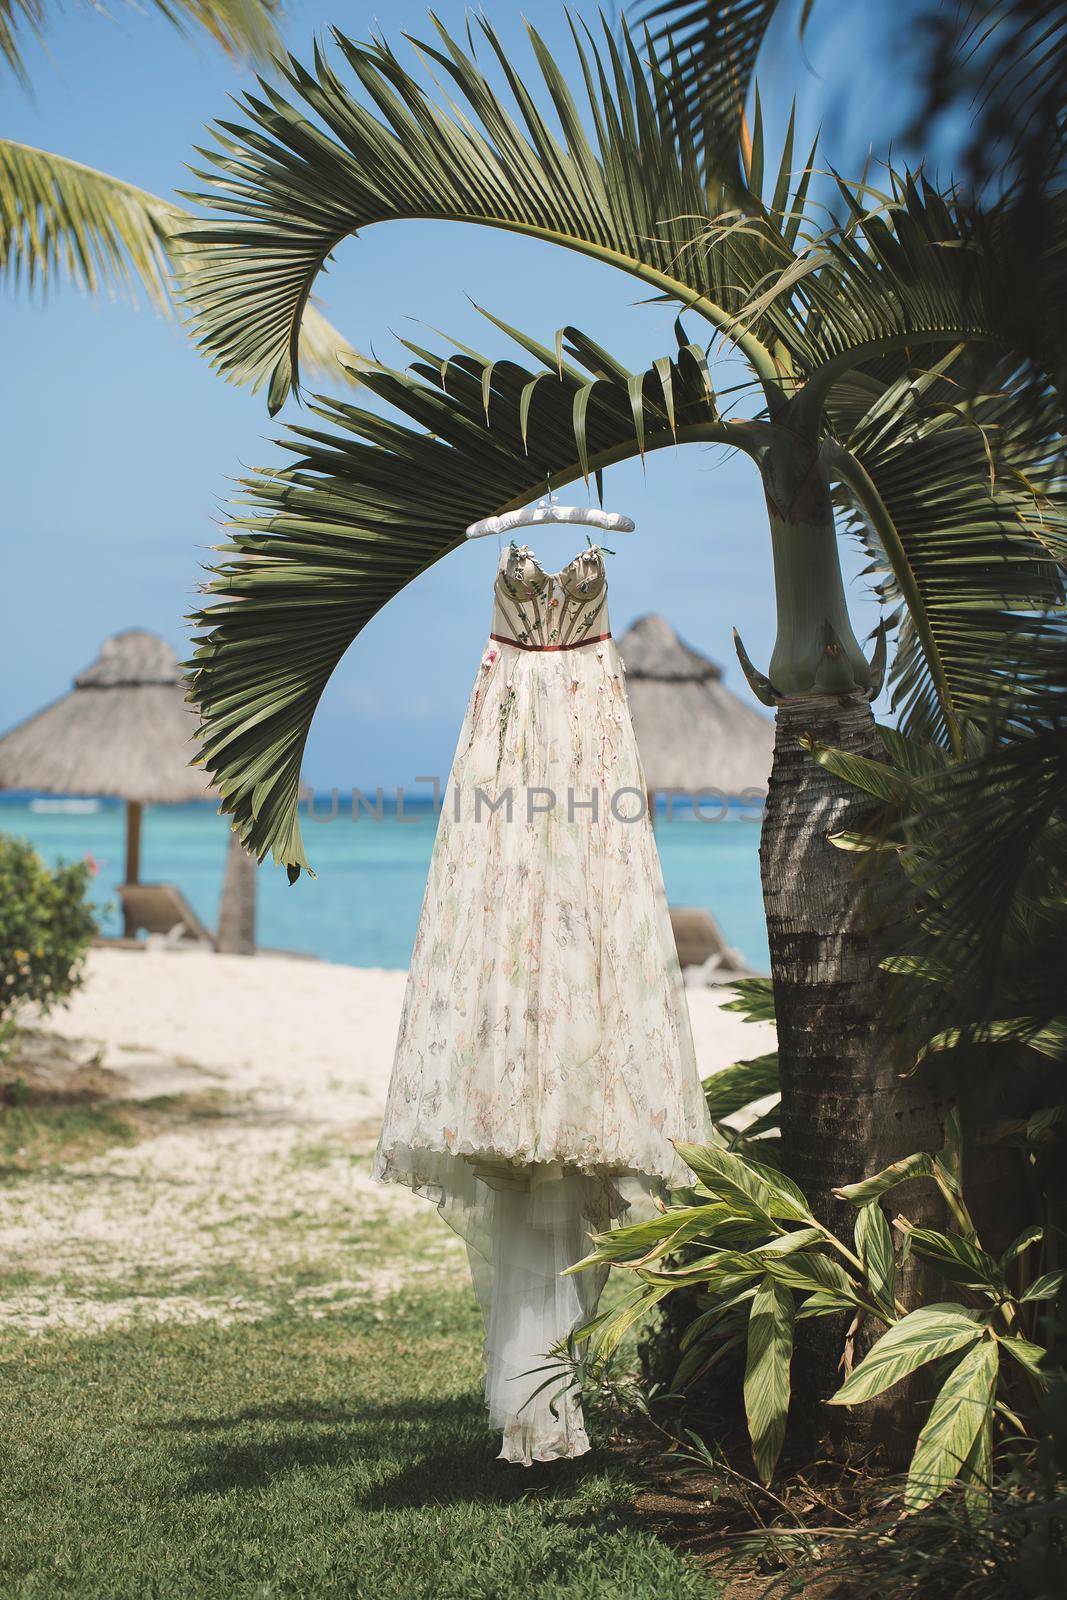 The wedding dress is hanging on a palm tree against the background of the ocean by StudioPeace